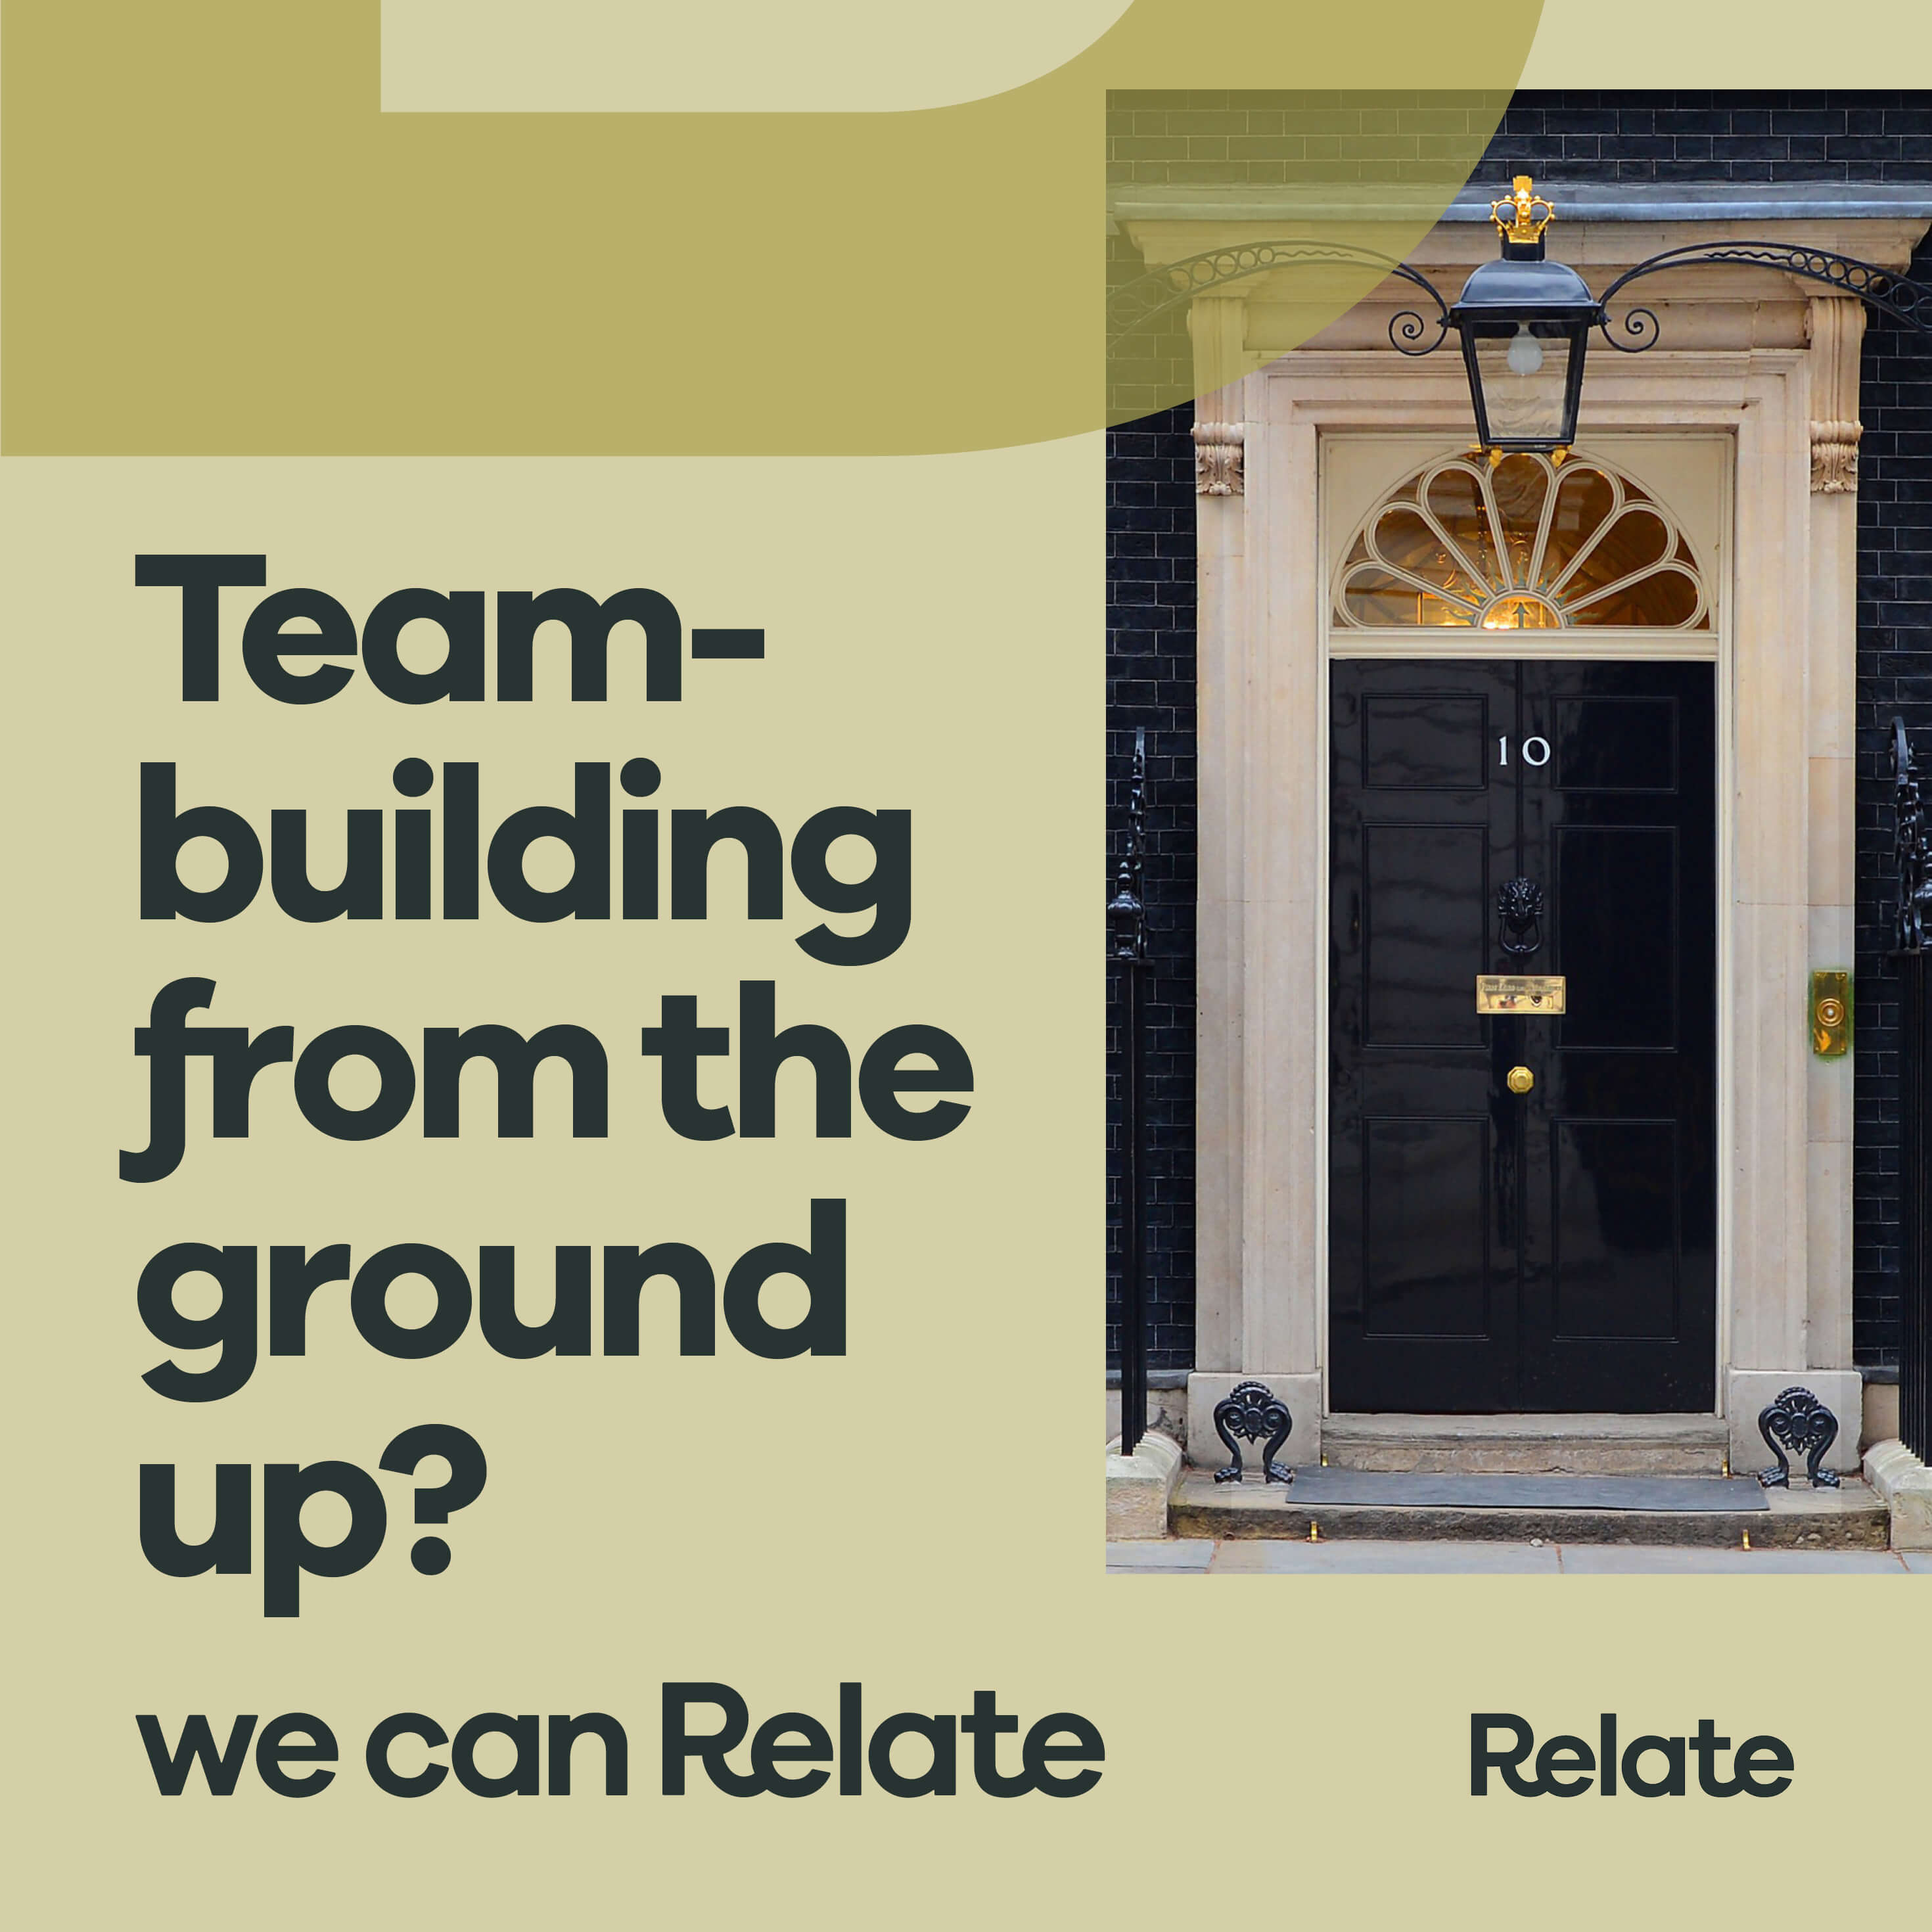 A picture of the front door of number 10 downing street with the accompanying text: team-building from the ground up? We can Relate.